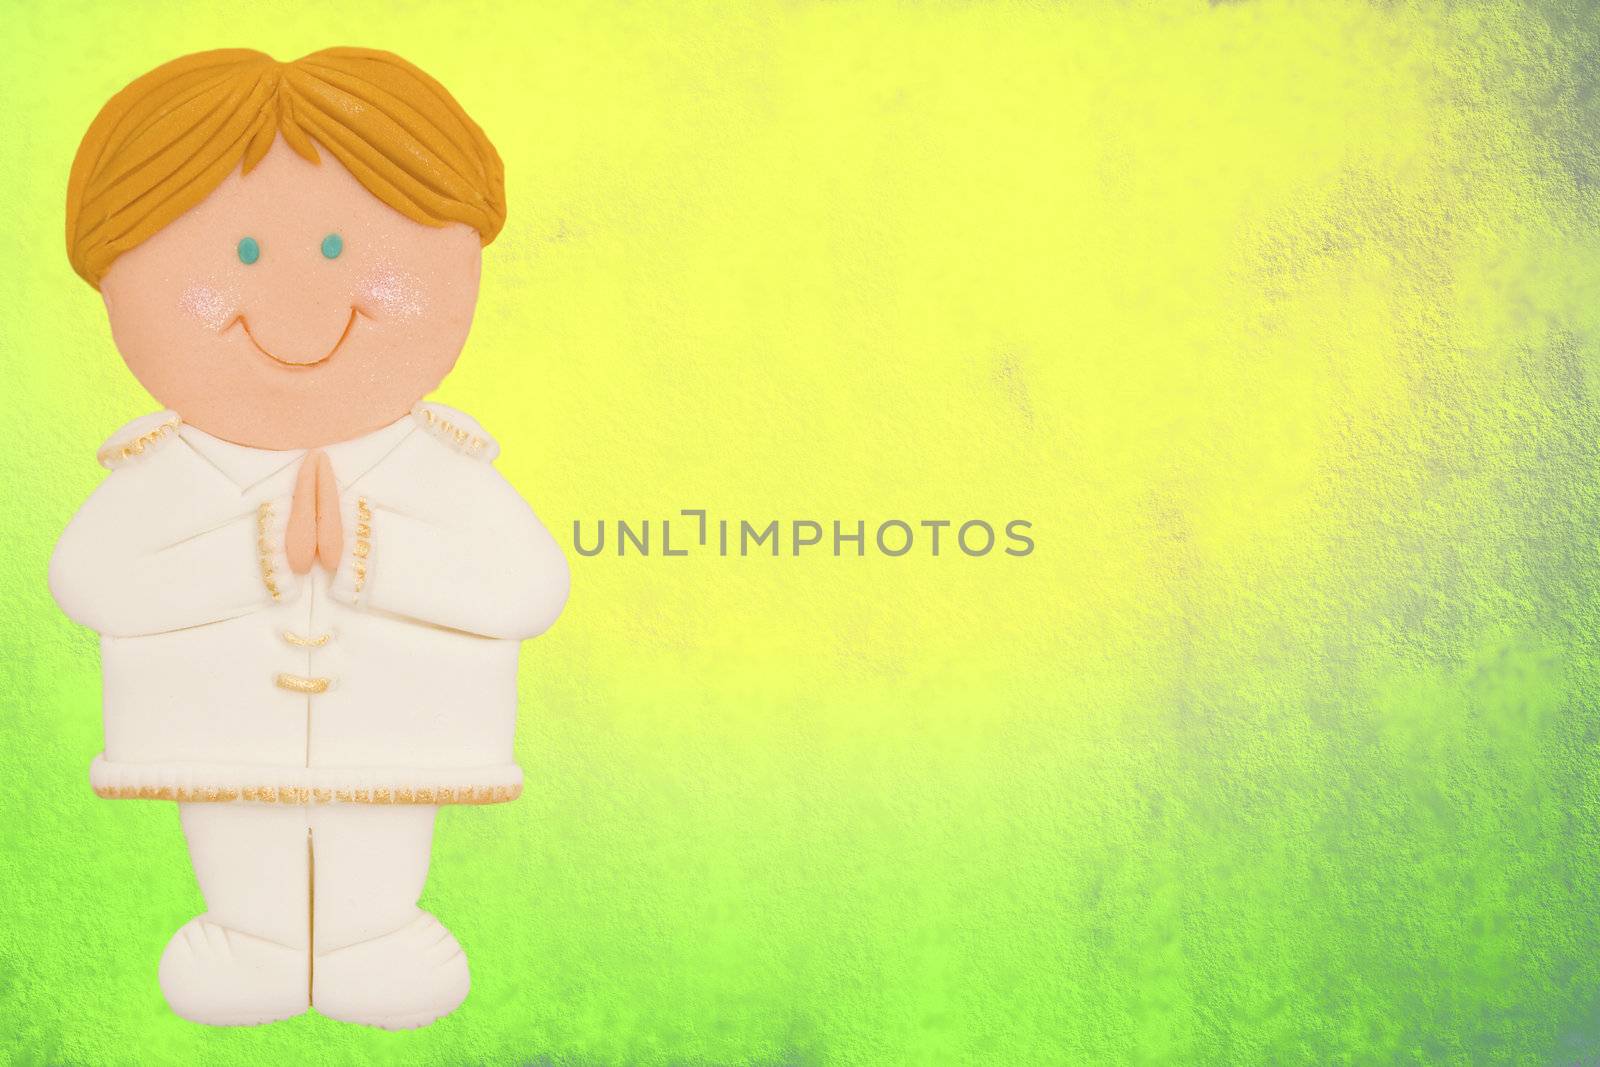 greeting invitation card, first communion, cute blond boy, colorful background